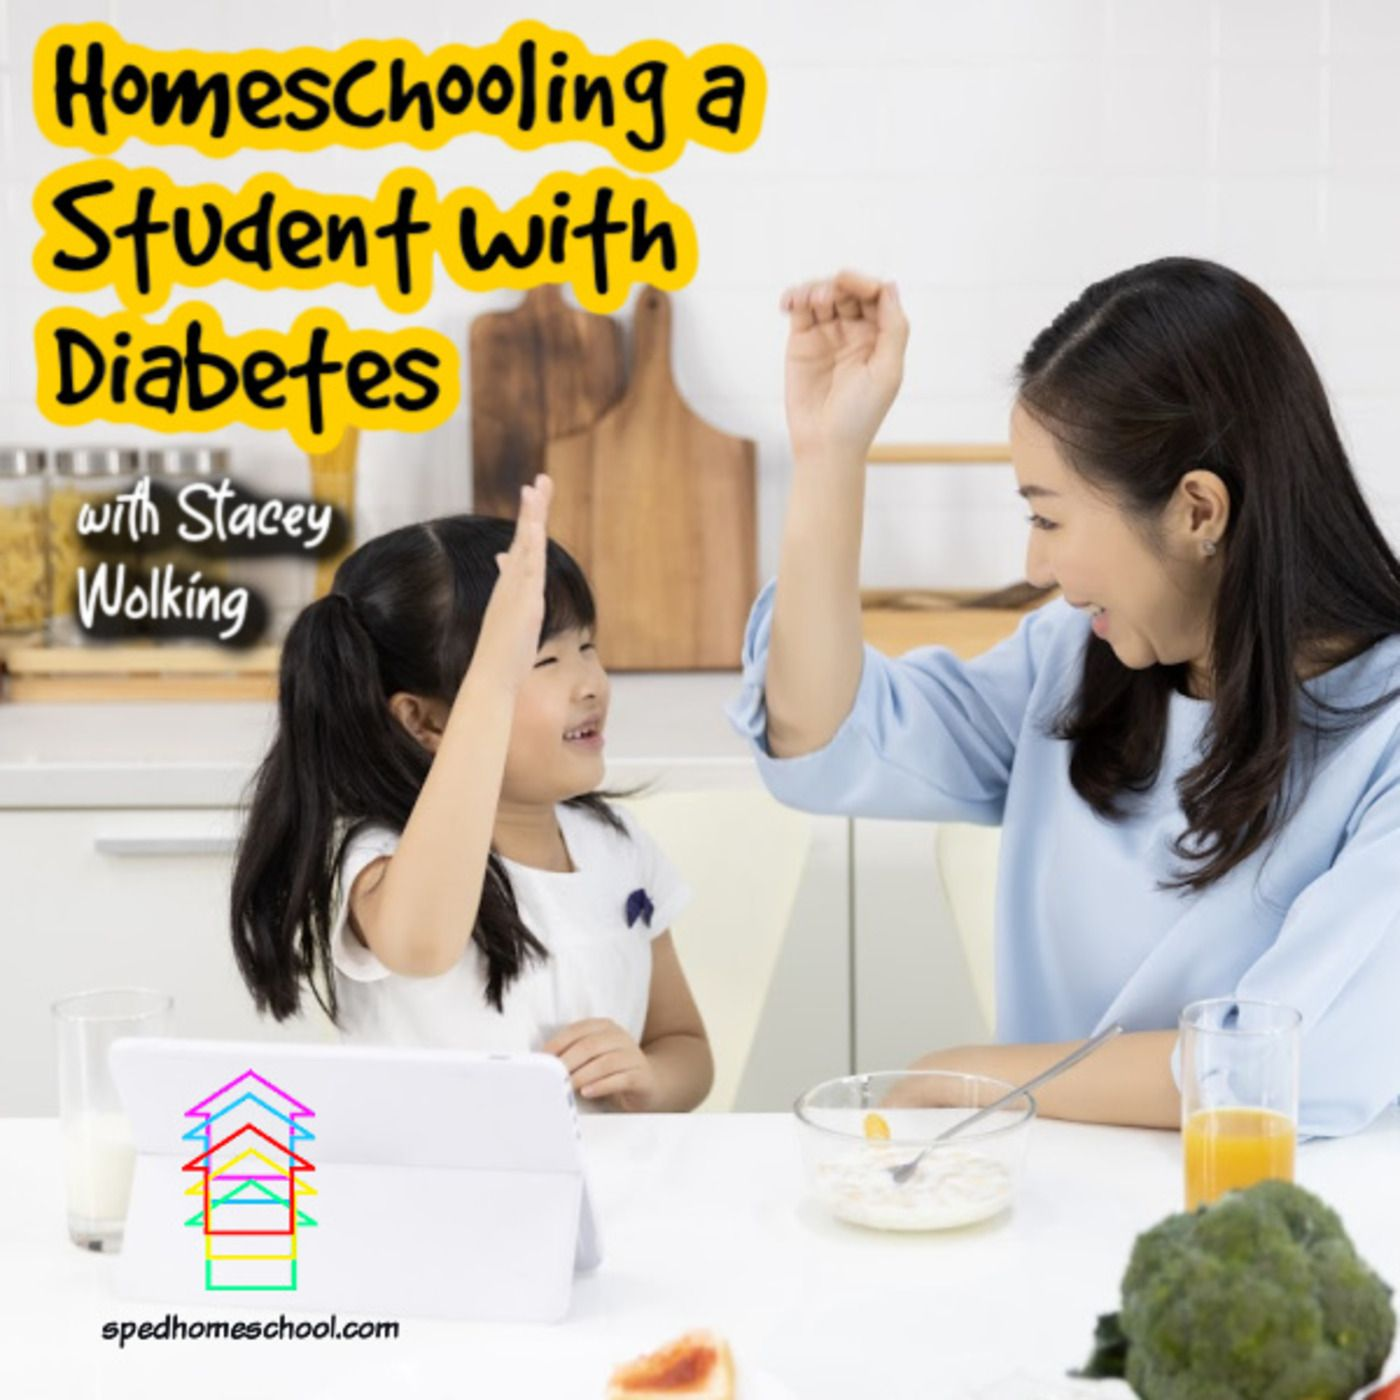 Homeschooling a Student with Diabetes